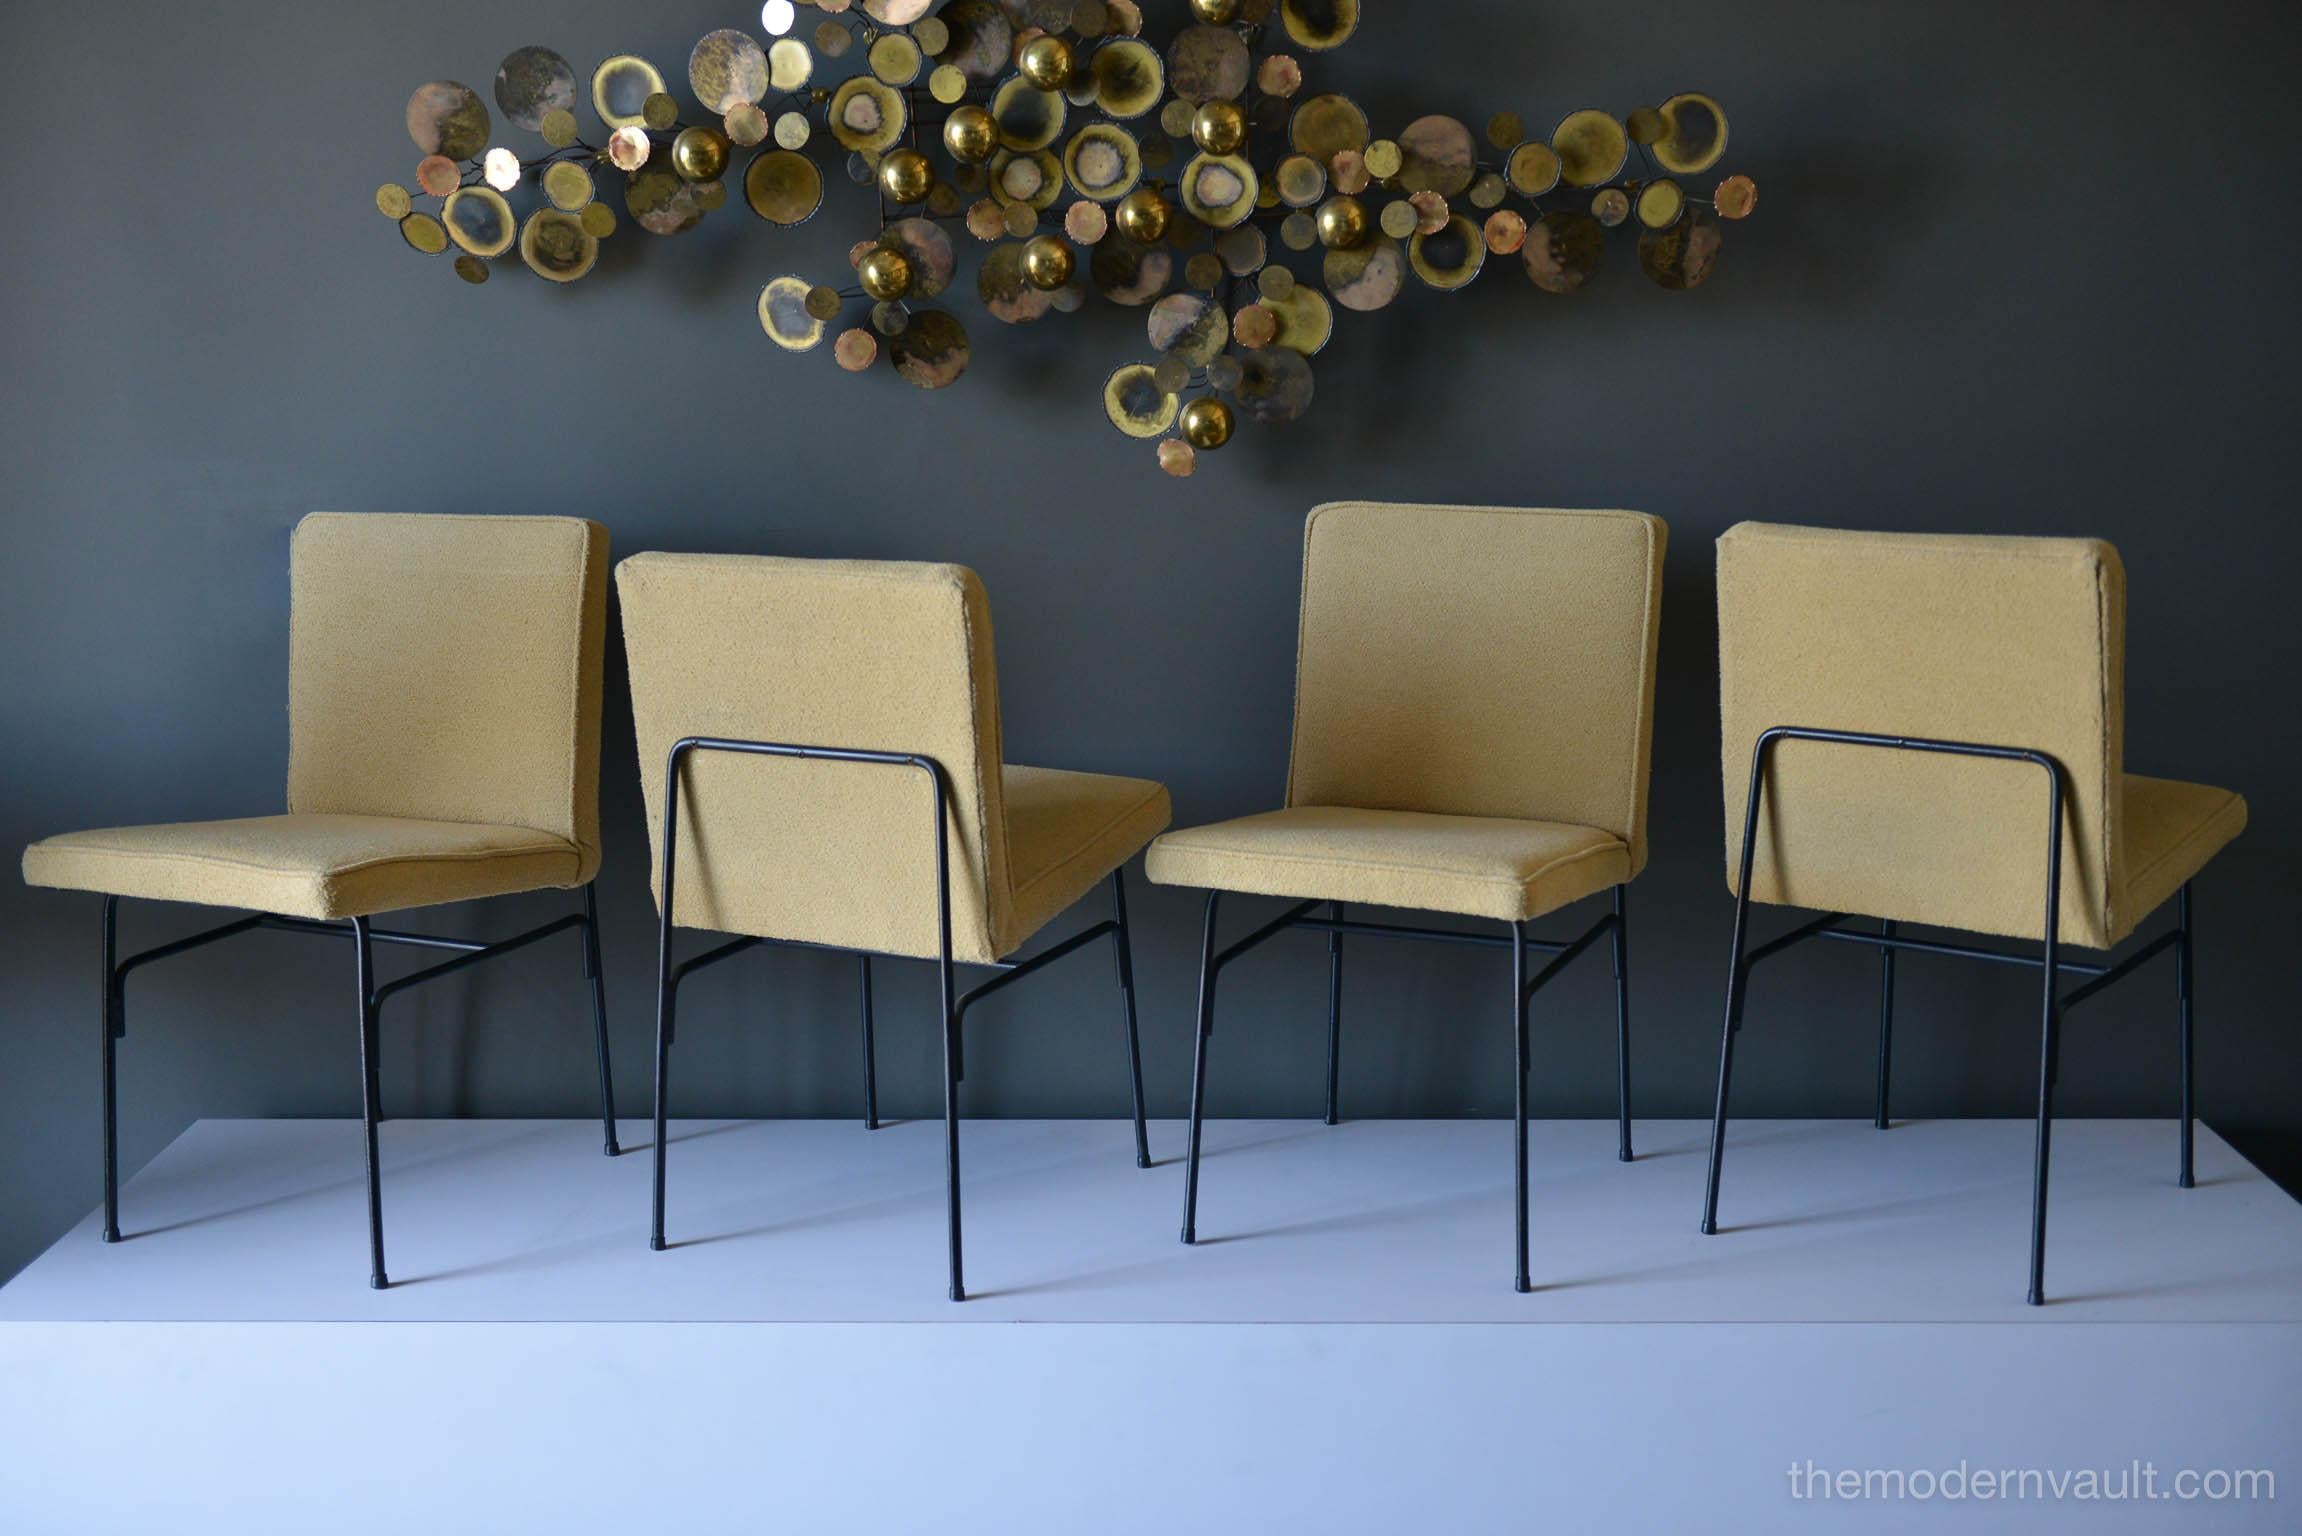 Set of four iron dining chairs by Allan Gould, circa 1955. Iron is in excellent vintage condition with no rust. Mustard color wool bouclé upholstery is in good condition. Easily recovered in a fabric of your choice.

Measures: H 30 in. x W 16 in.